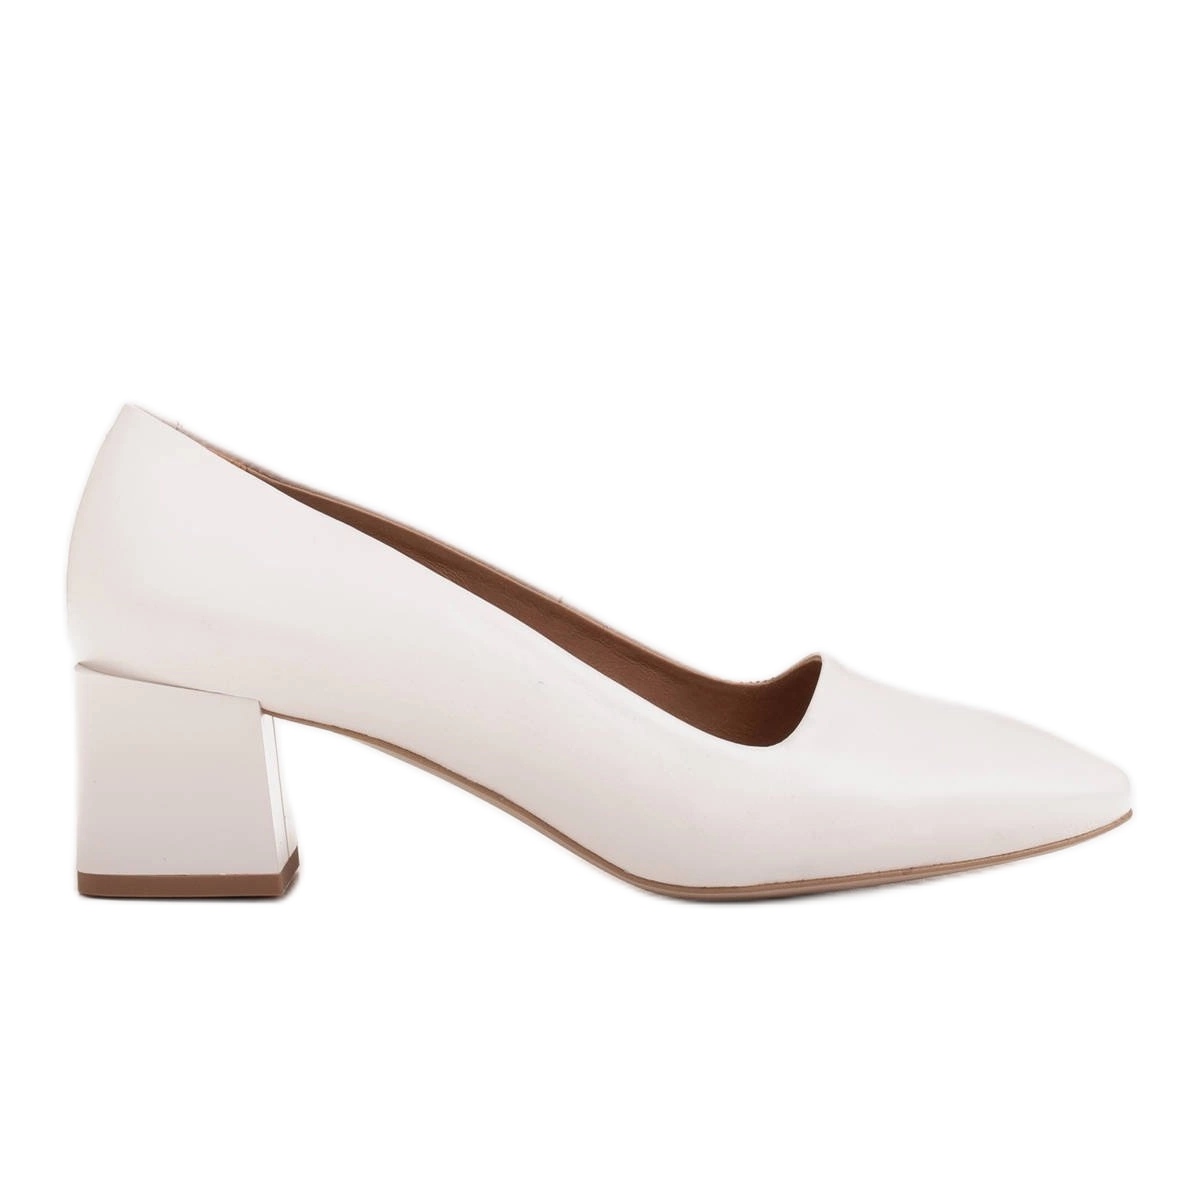 zanger Diakritisch begrijpen Marco Shoes Elegant white pumps made of delicate natural leather - KeeShoes